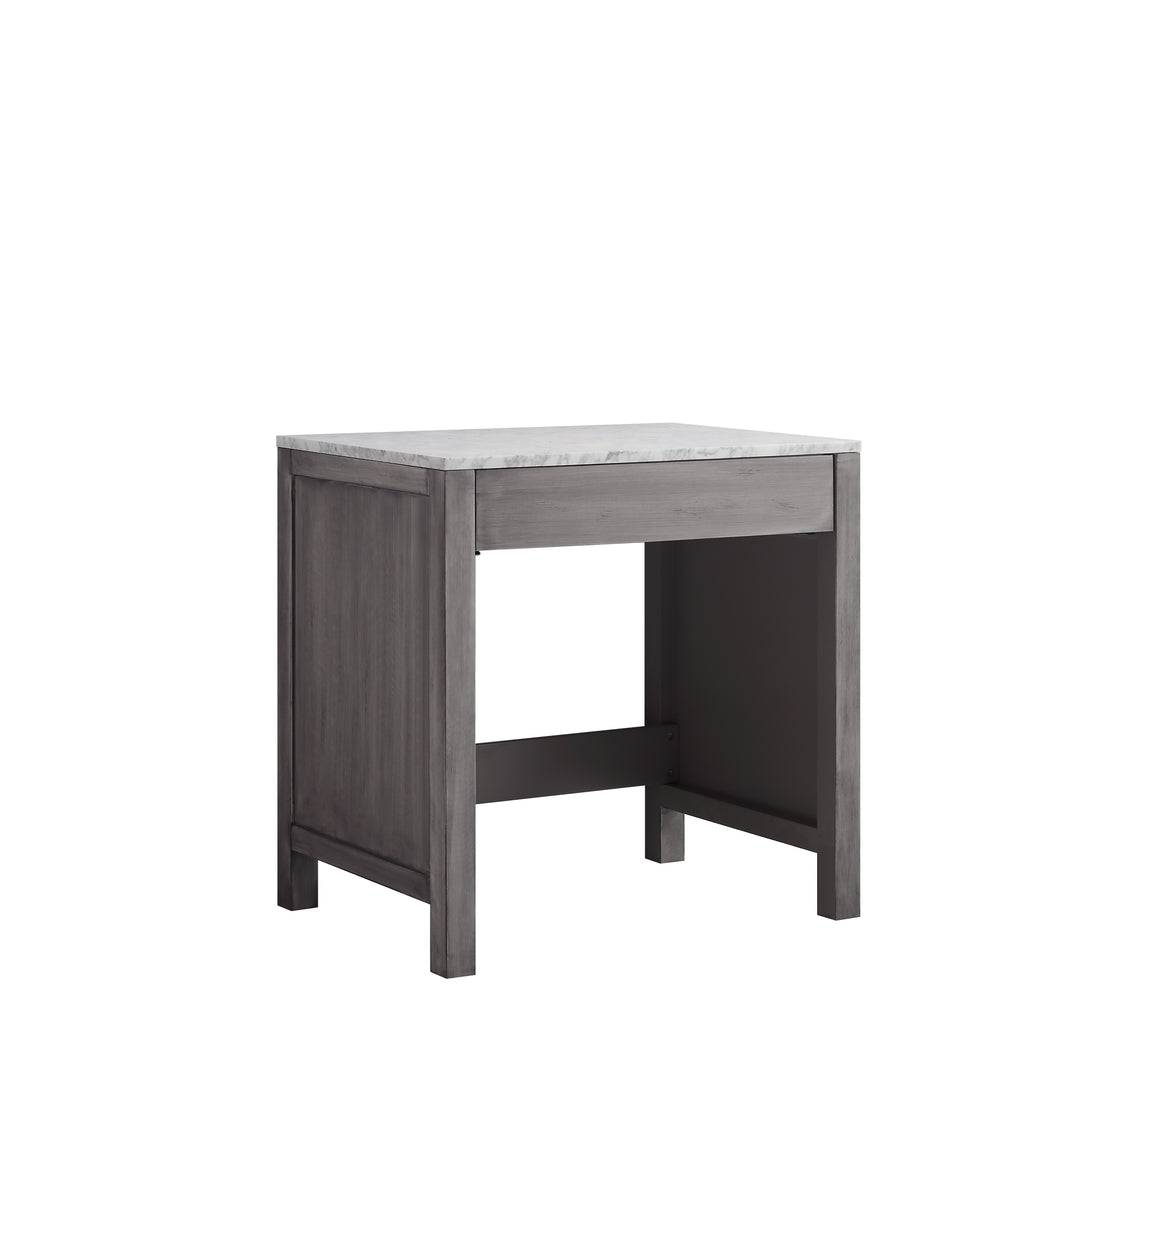 Jacques 30" Single Make-Up Table in Distressed Grey, White Carrera Marble Top